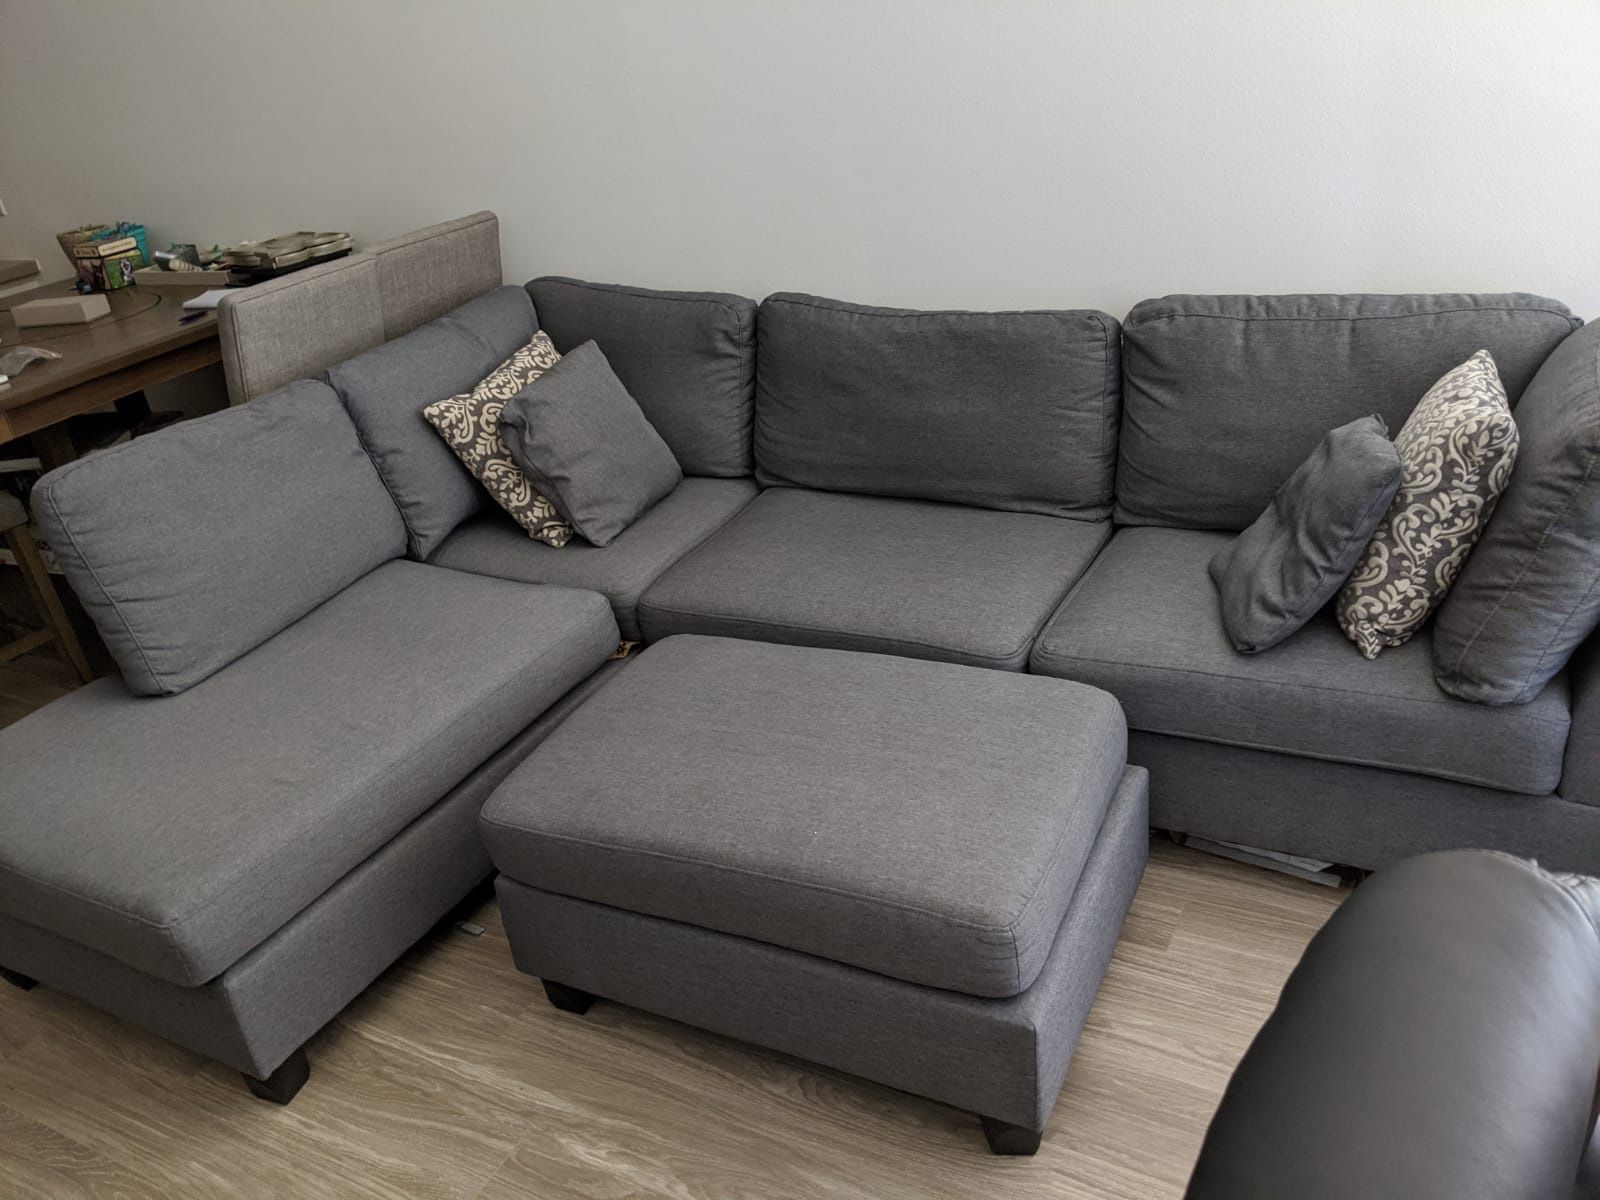 Available if up: Gray L shaped couch, Reversible. Price Firm